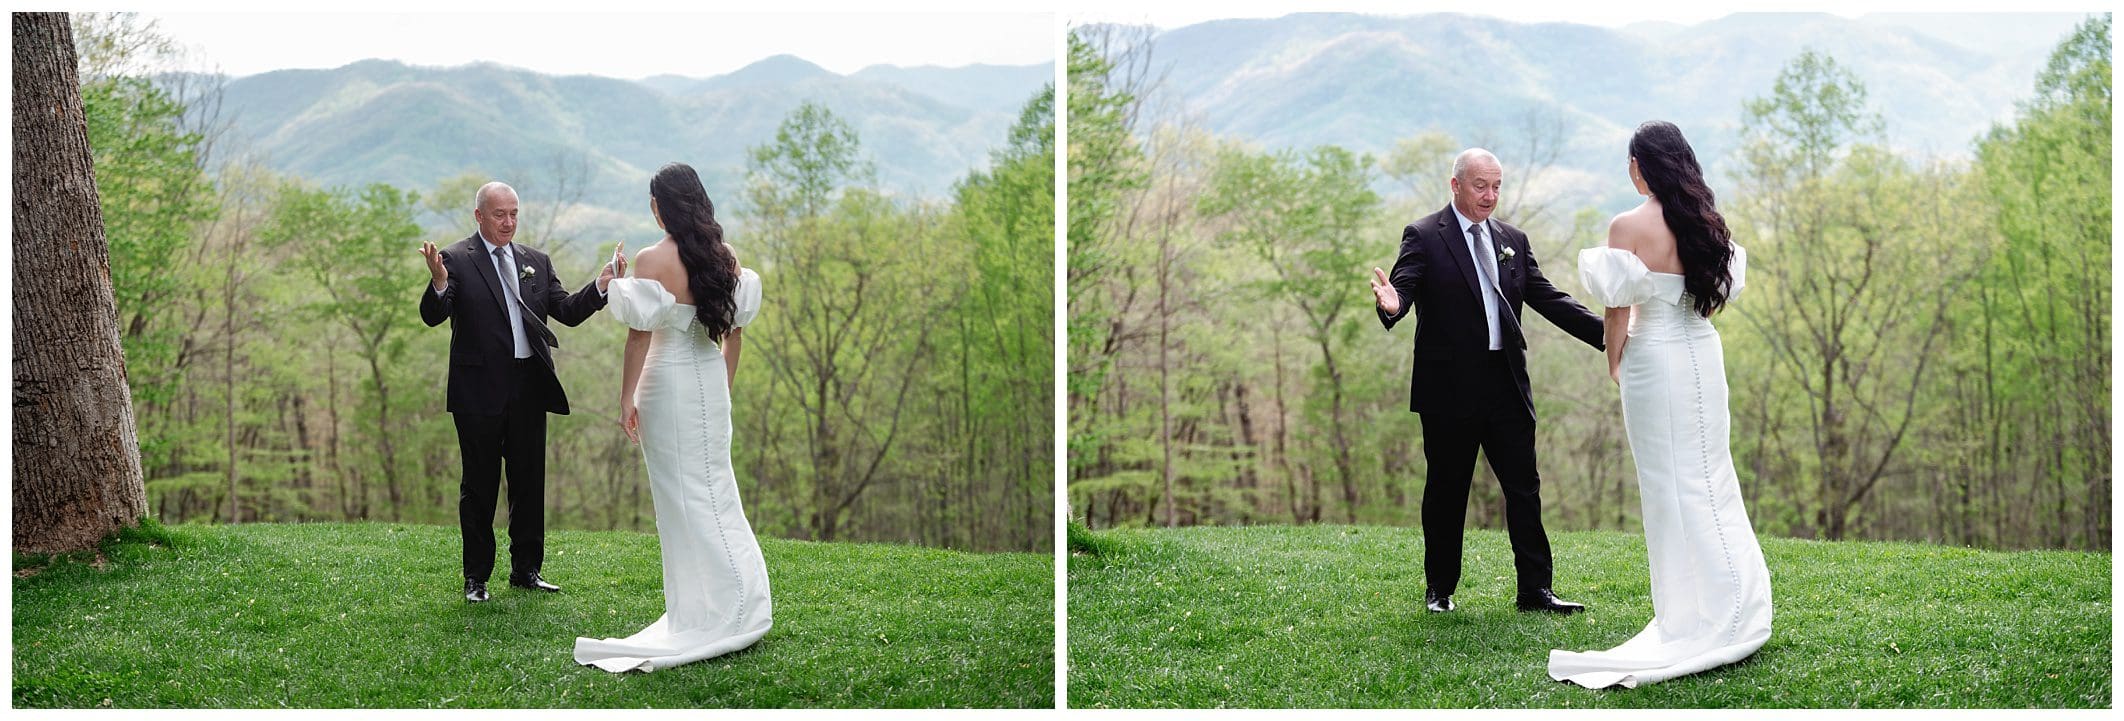 Two images of a bride and groom interacting outside with mountain views in the background. in the first, they are talking; in the second, the groom gestures while speaking.